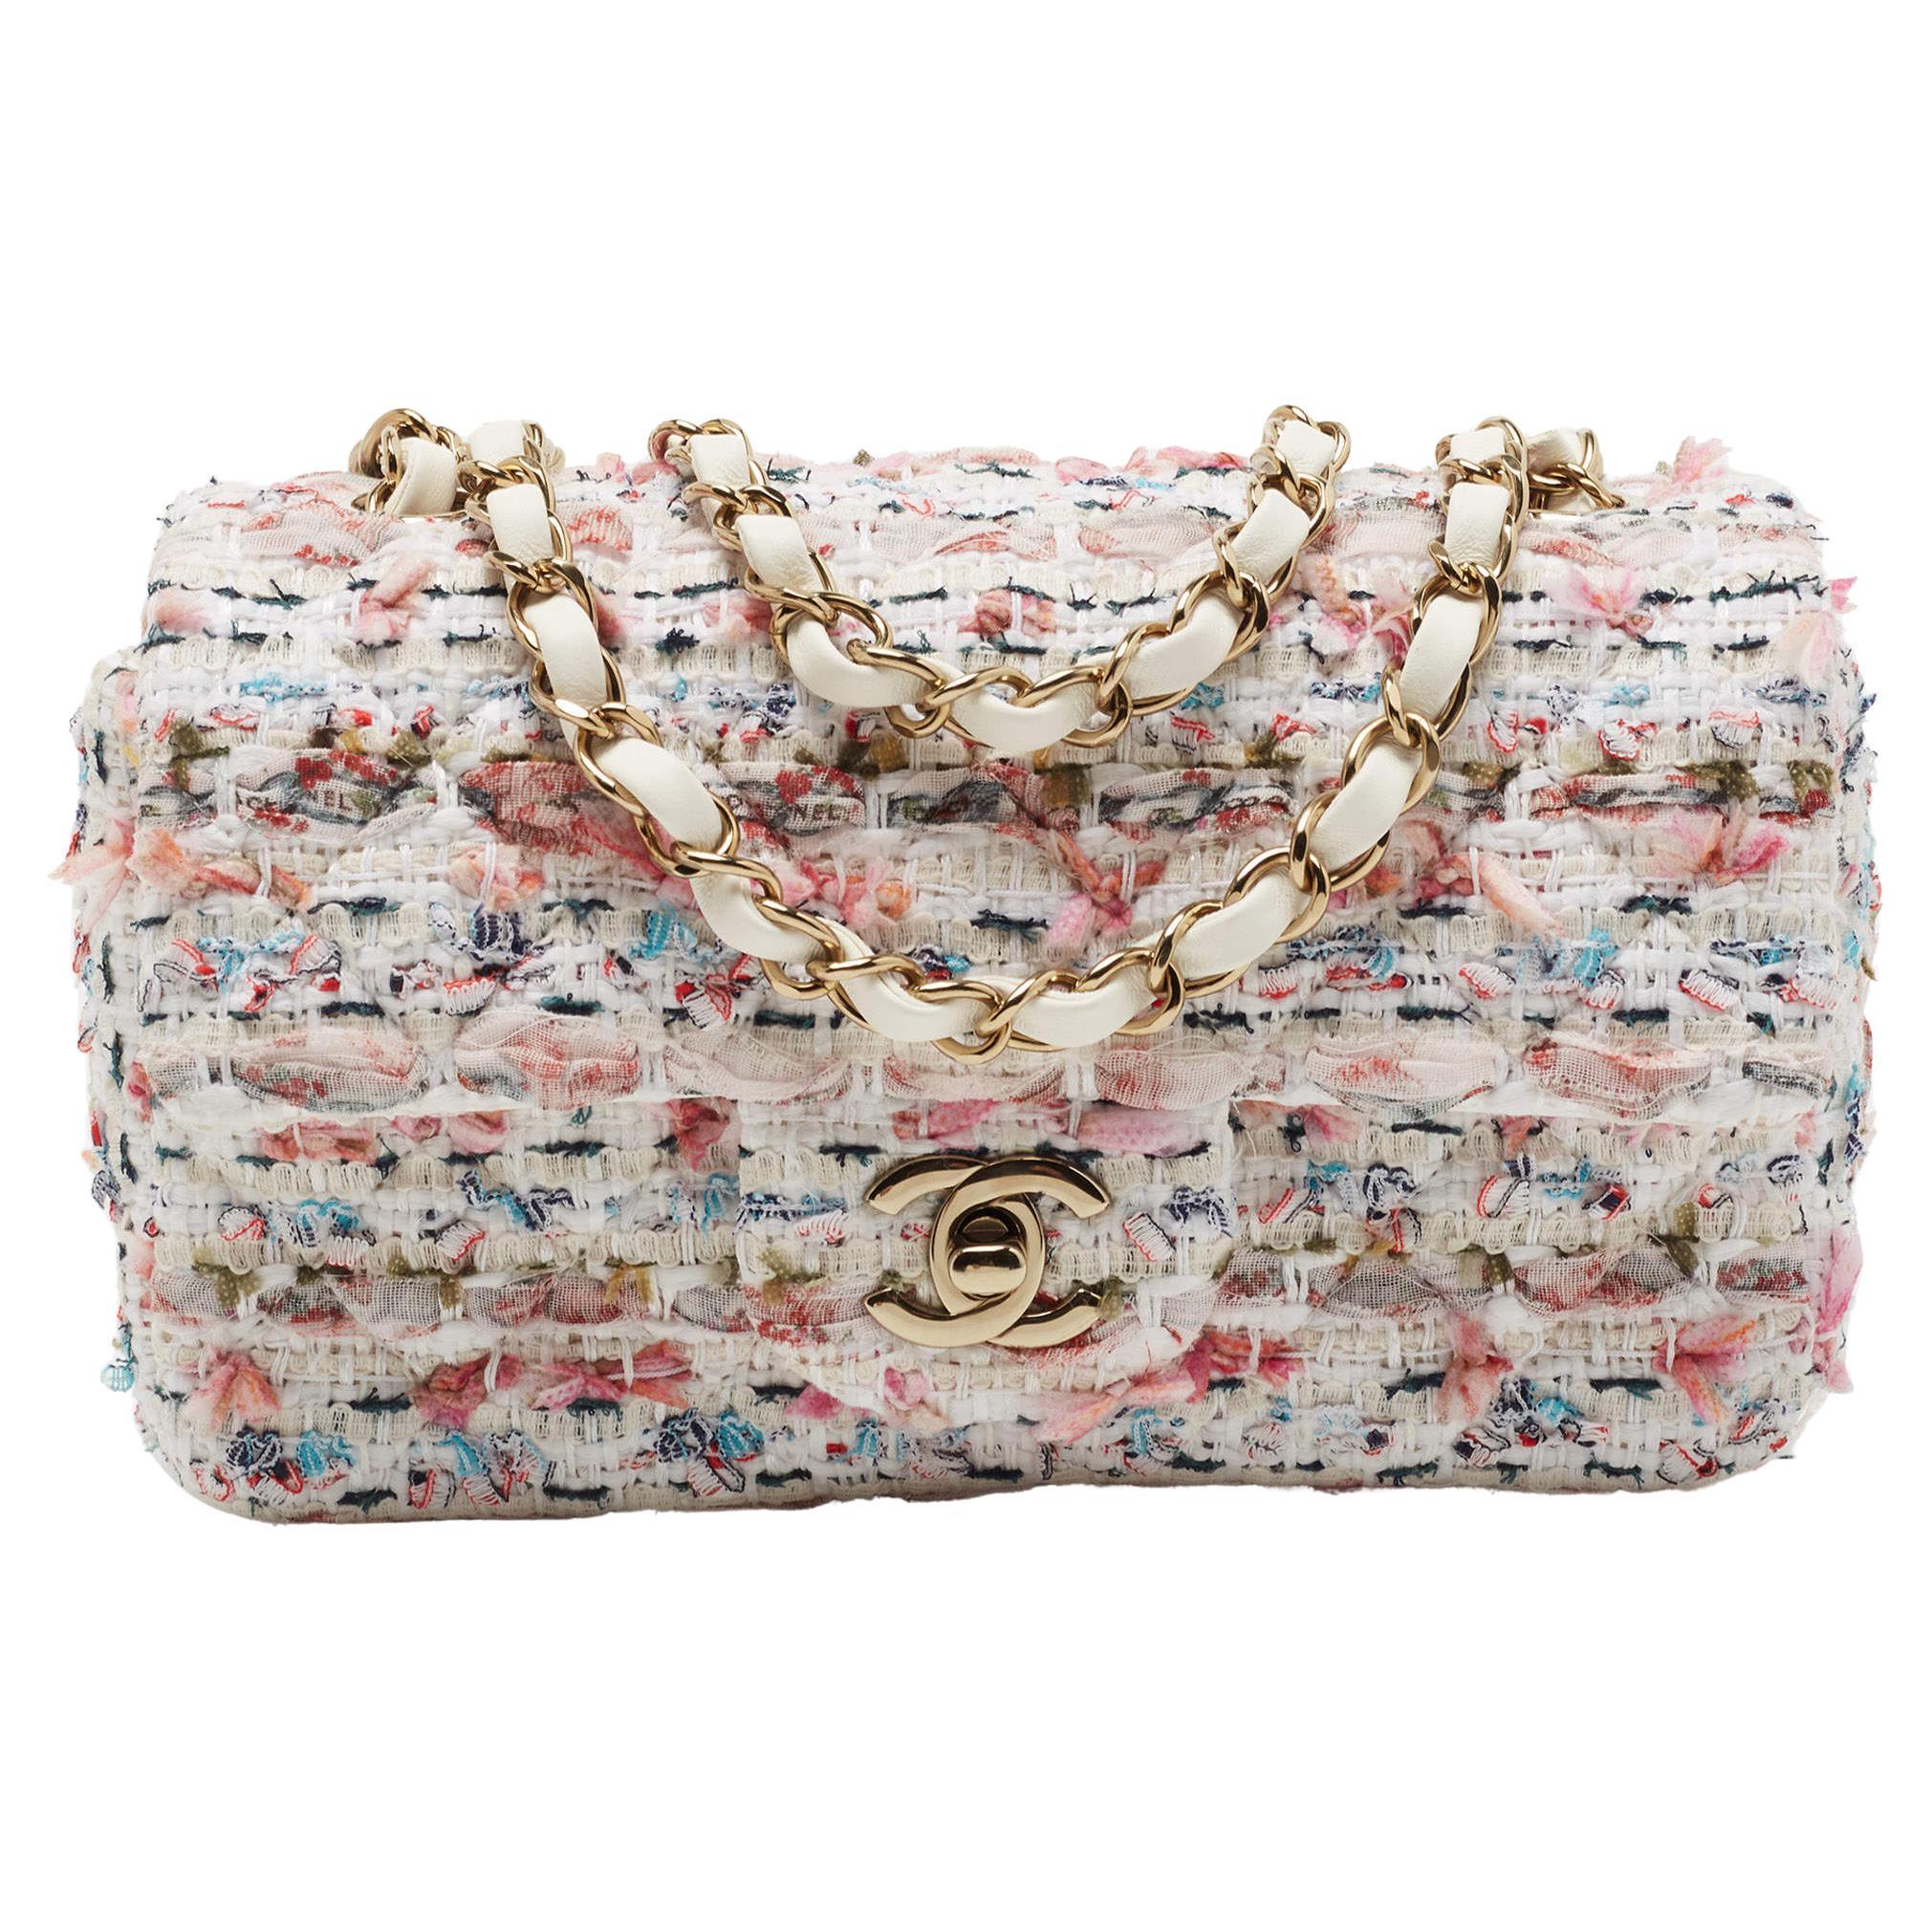 Chanel White/Multiicolor Quilted Tweed New Mini Classic Flap Bag